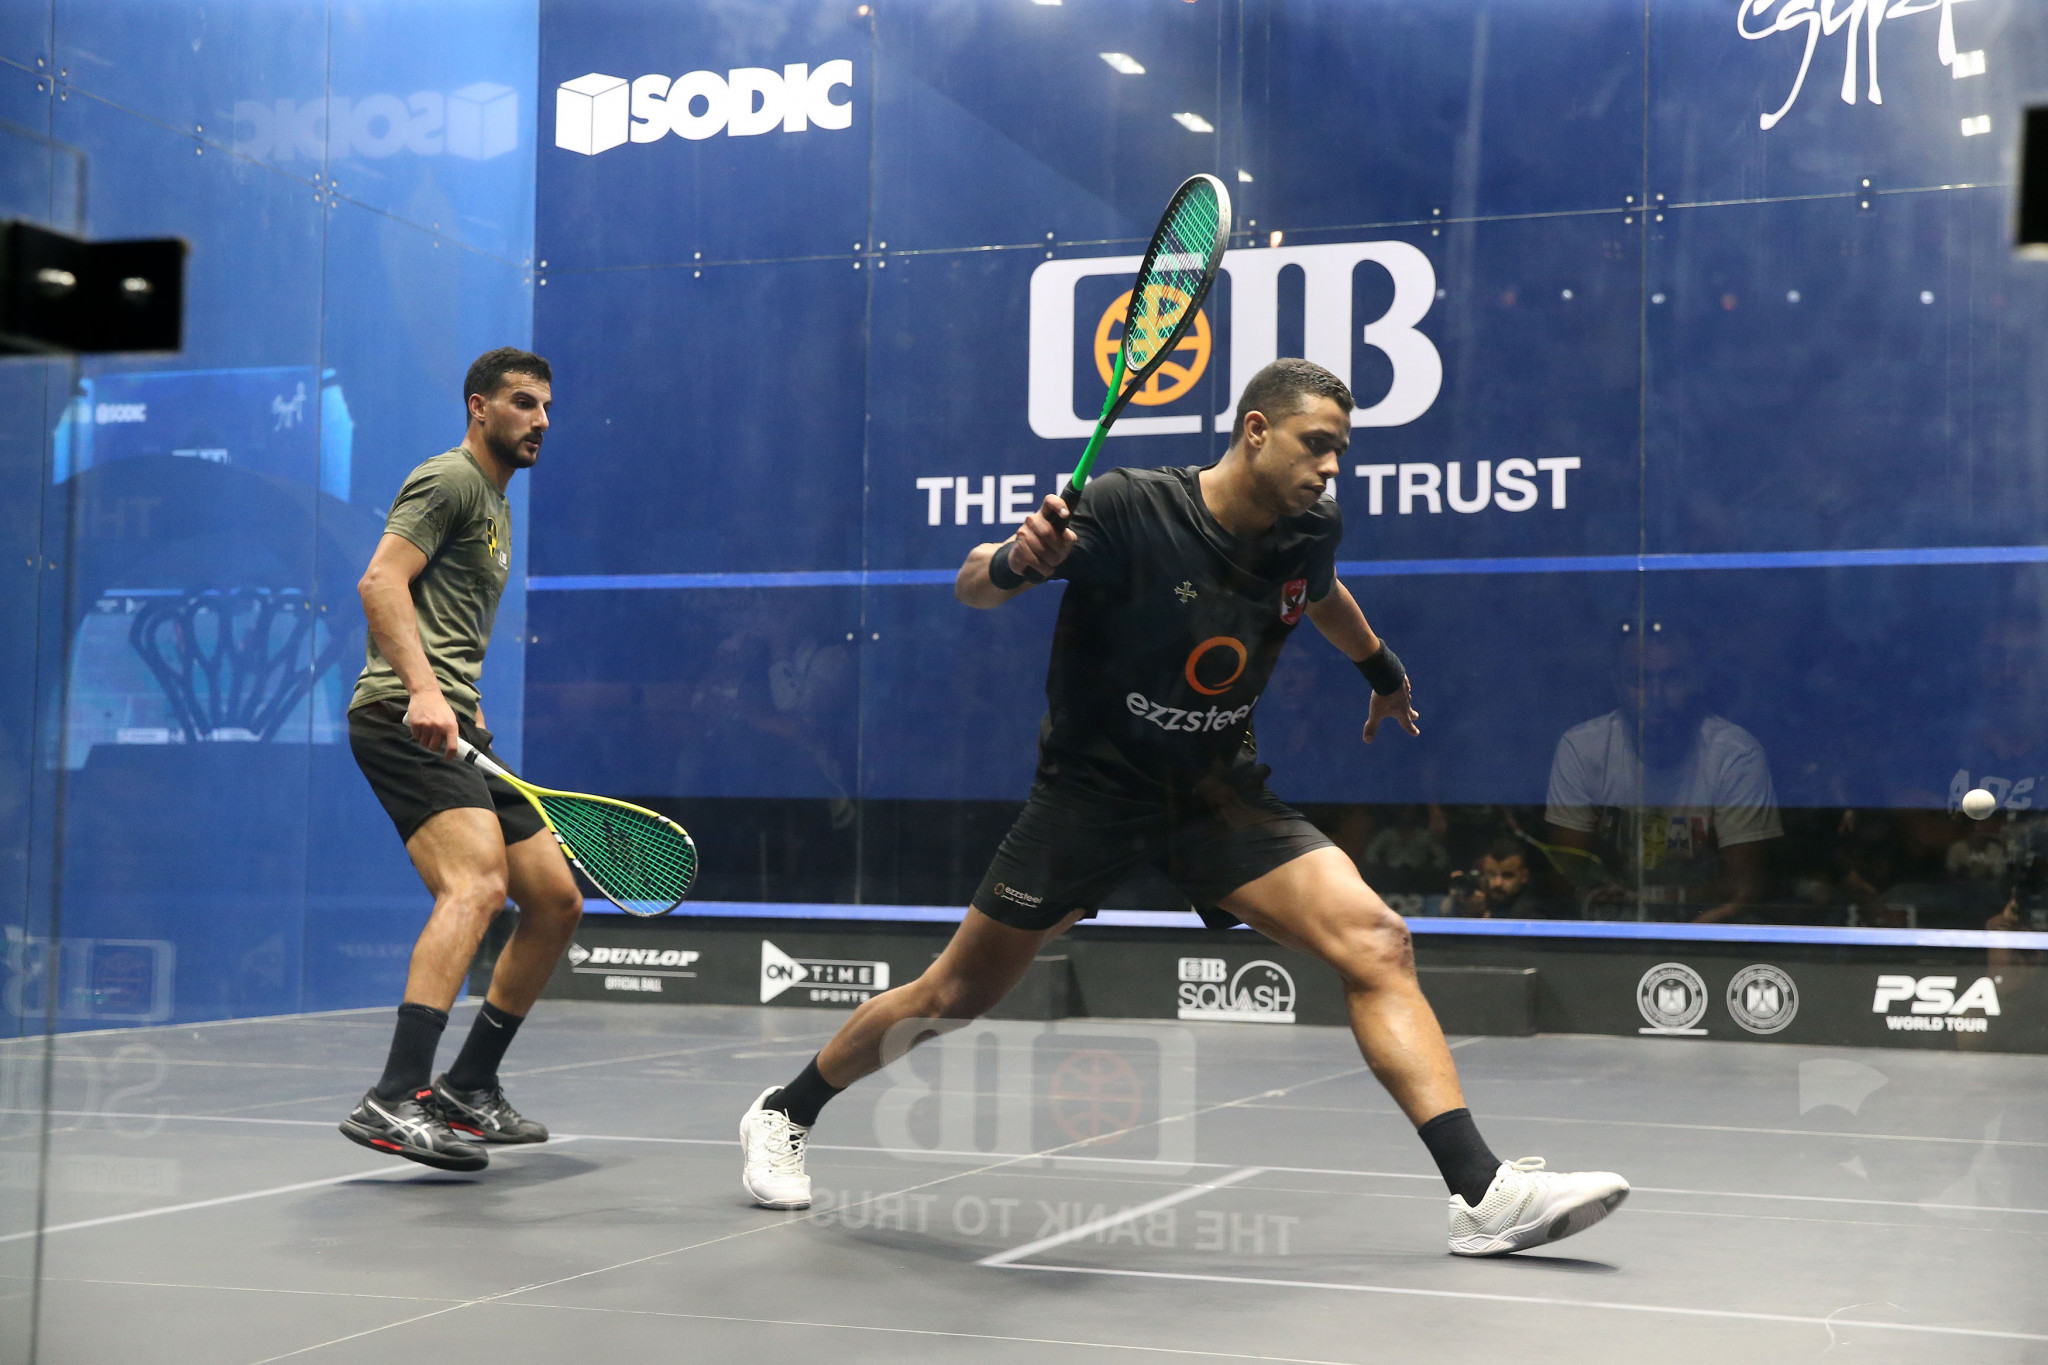 The new ASB GlassFloor technology made its first appearance of this season at the Egyptian Open during a match between Mazen Hesham, left, and Mostafa Asal, right ©PSA